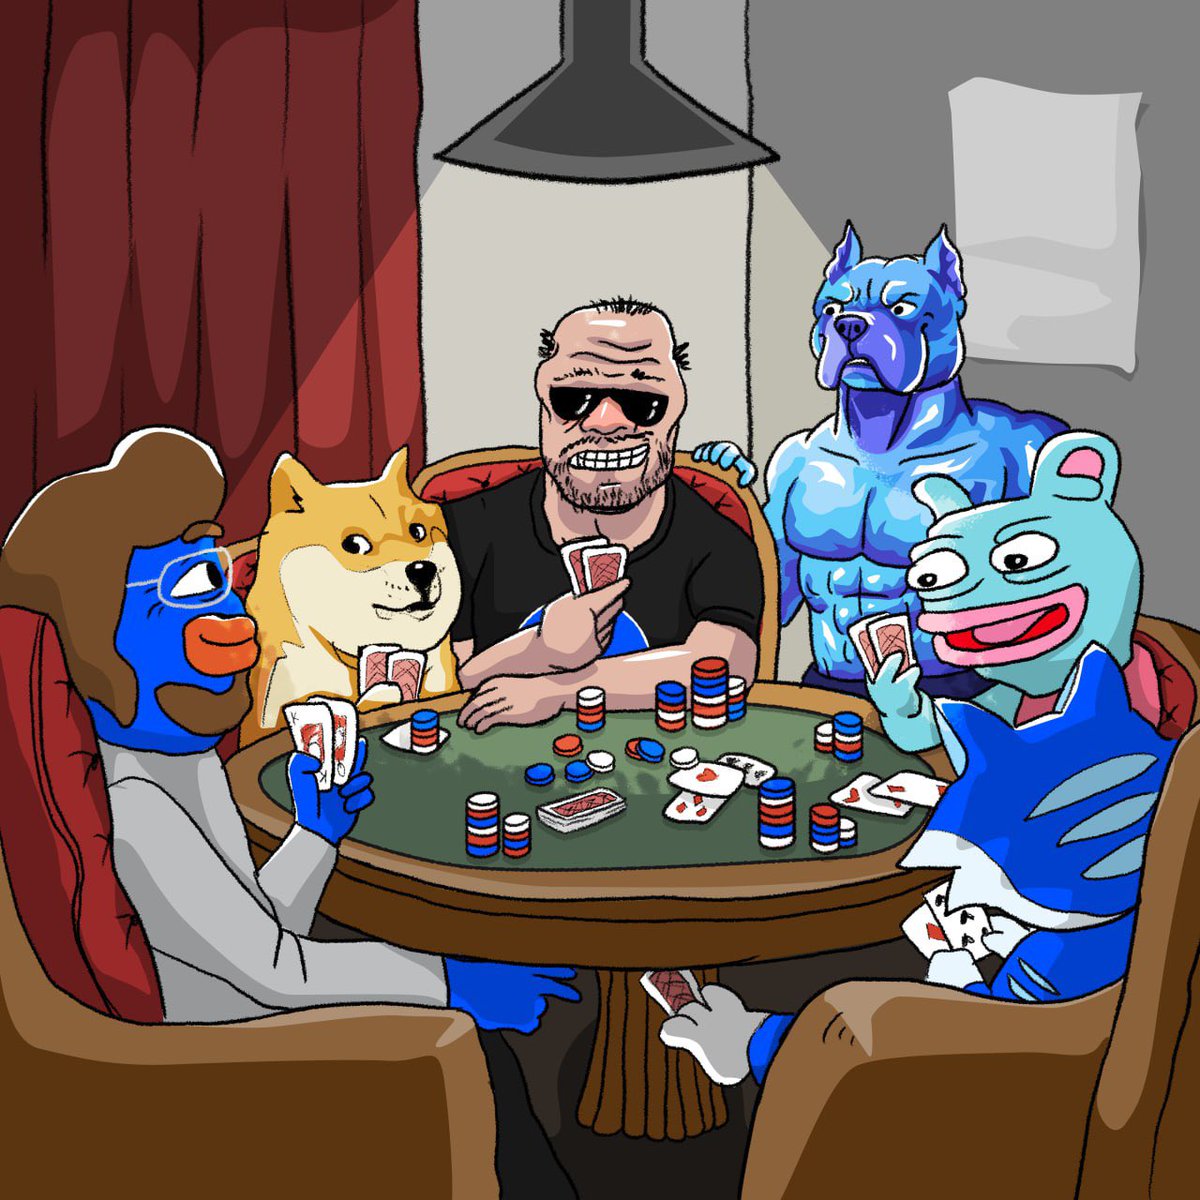 @JakeGagain There’s a seat waiting for pepe at the poker table.🤘 #Boomer on #basenetwork